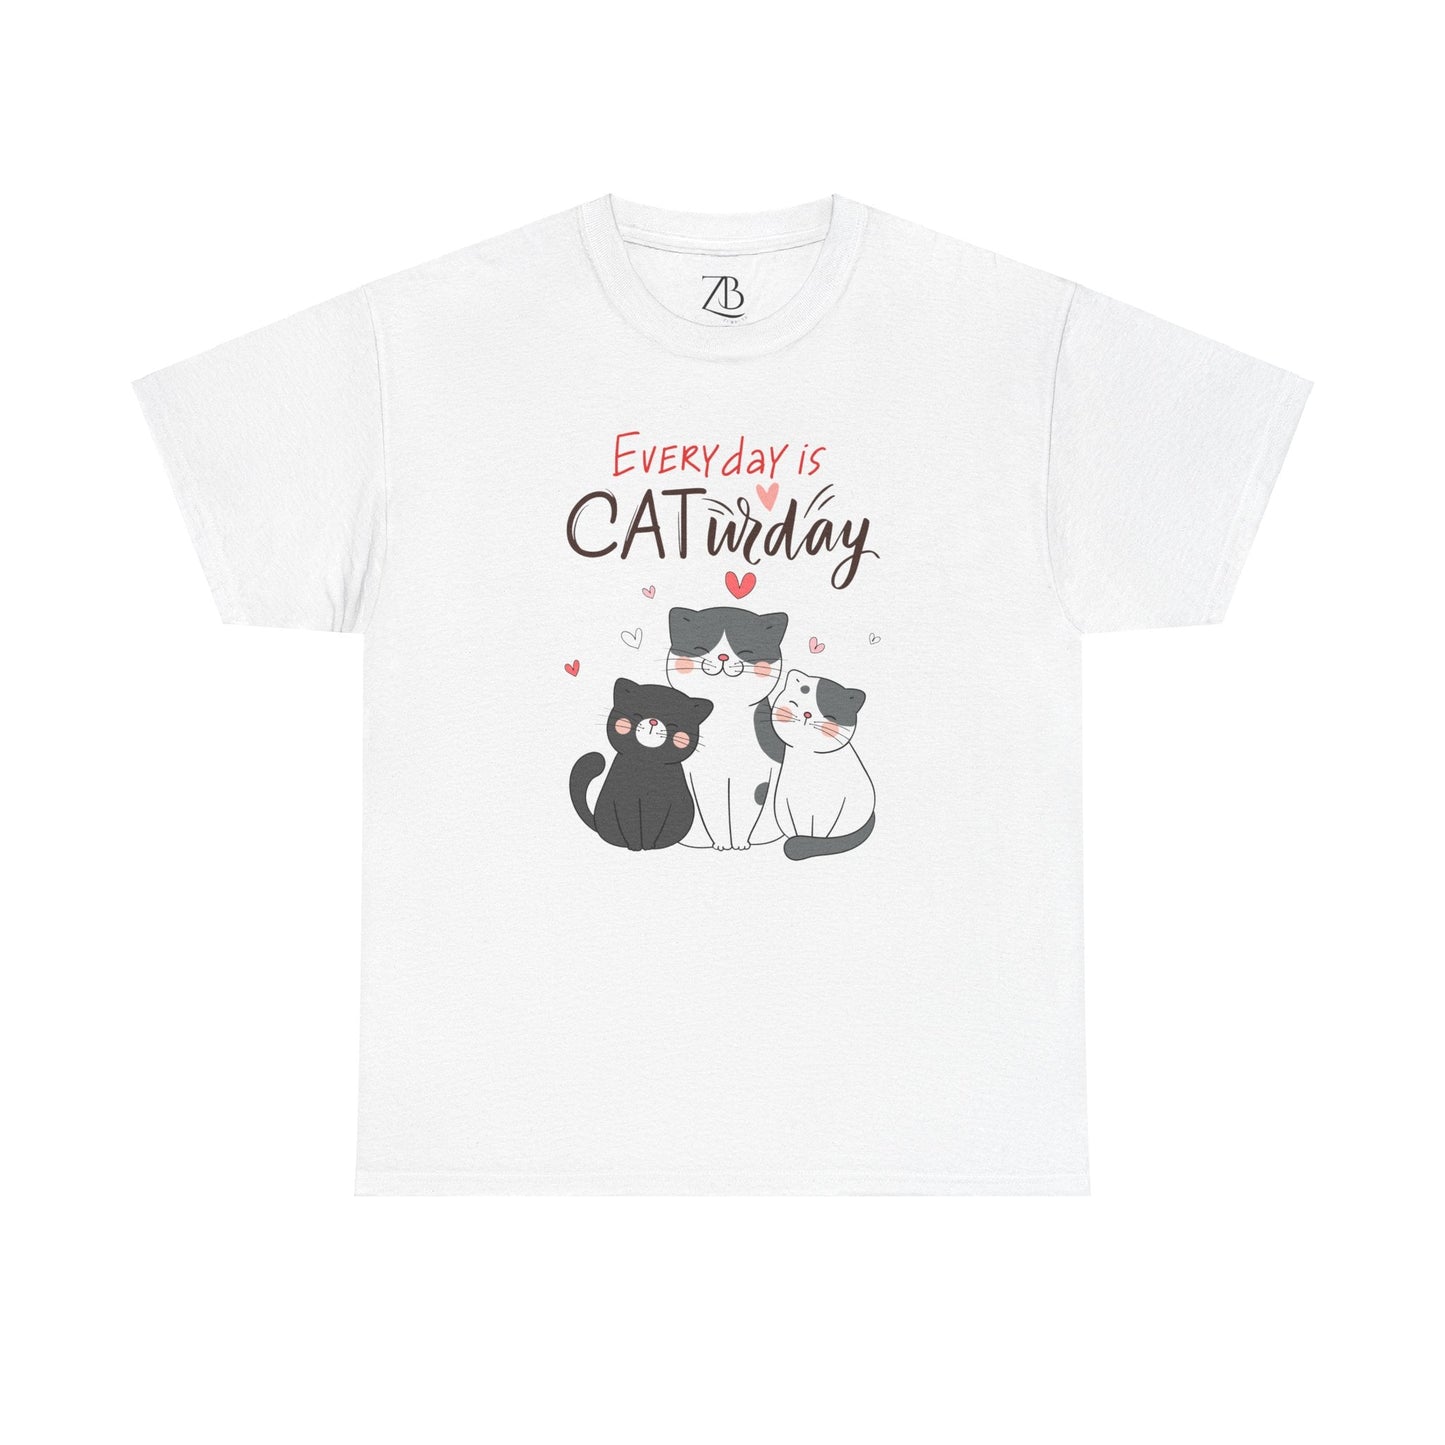 Purr Day Women's Cotton Tee - ZumBuys